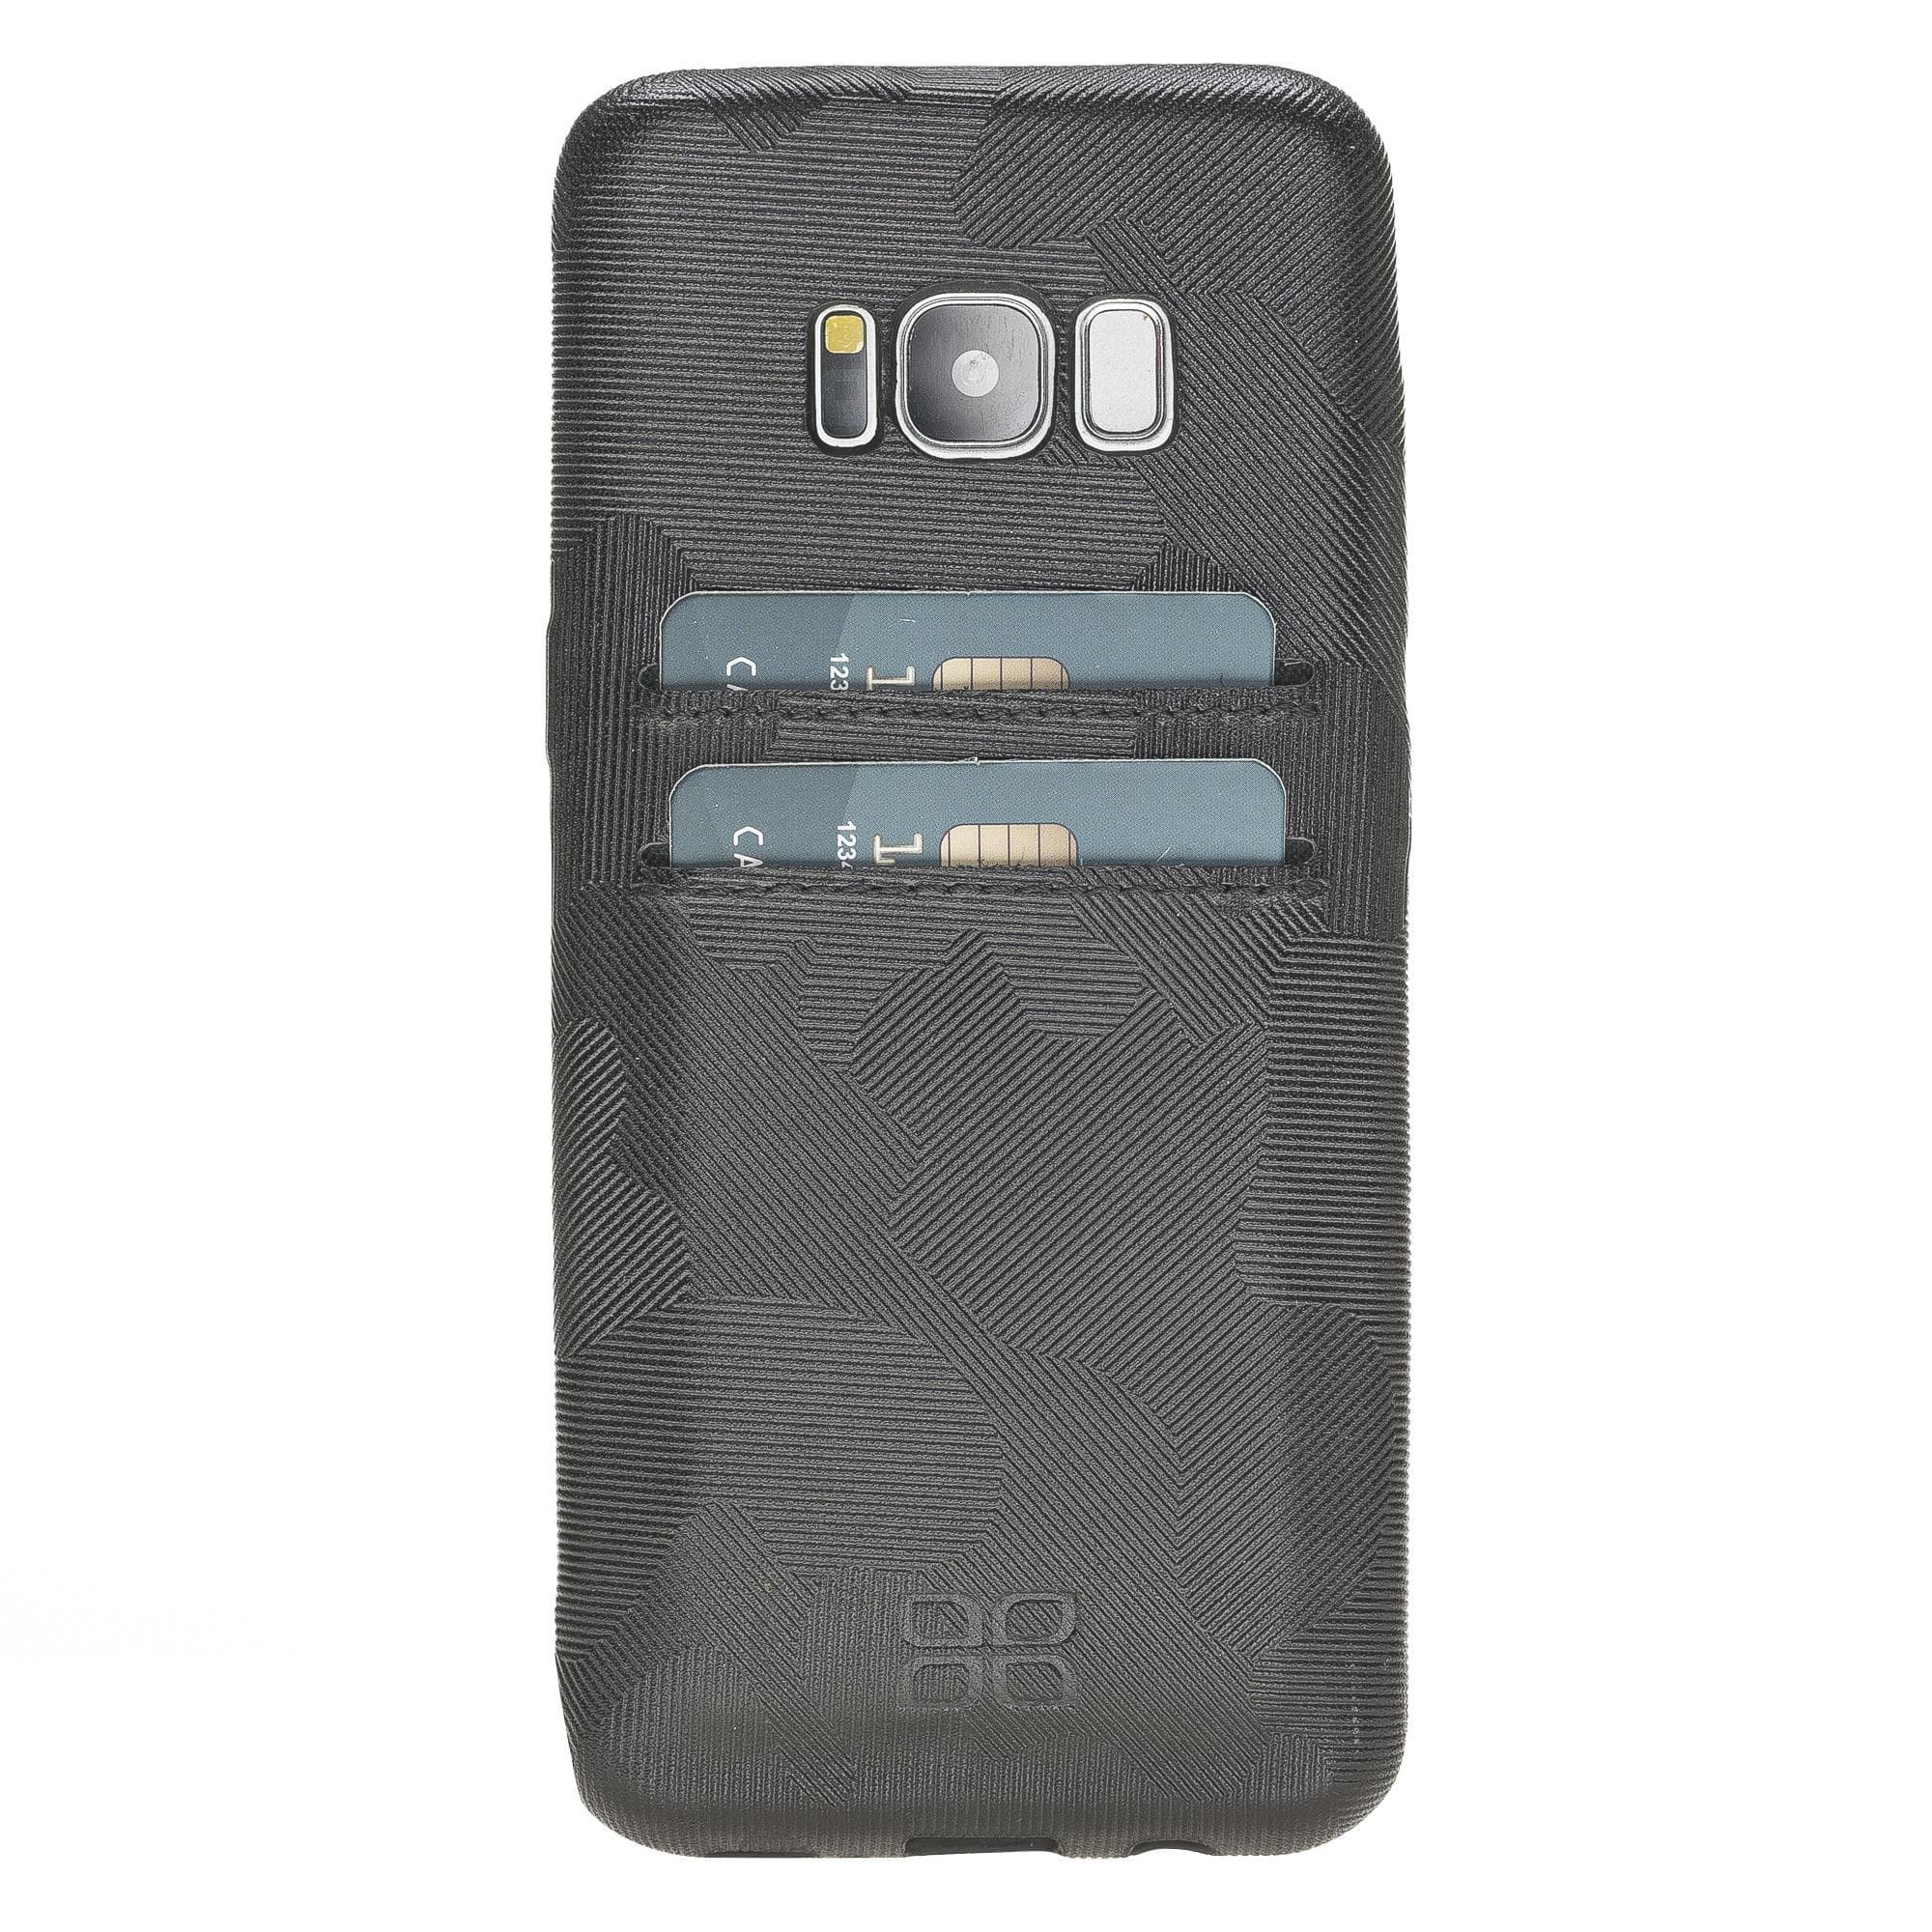 B2B - Samsung Galaxy S8 Leather Case / UCCC - Ultra Cover with Card Holder Camouflage Black Bouletta B2B